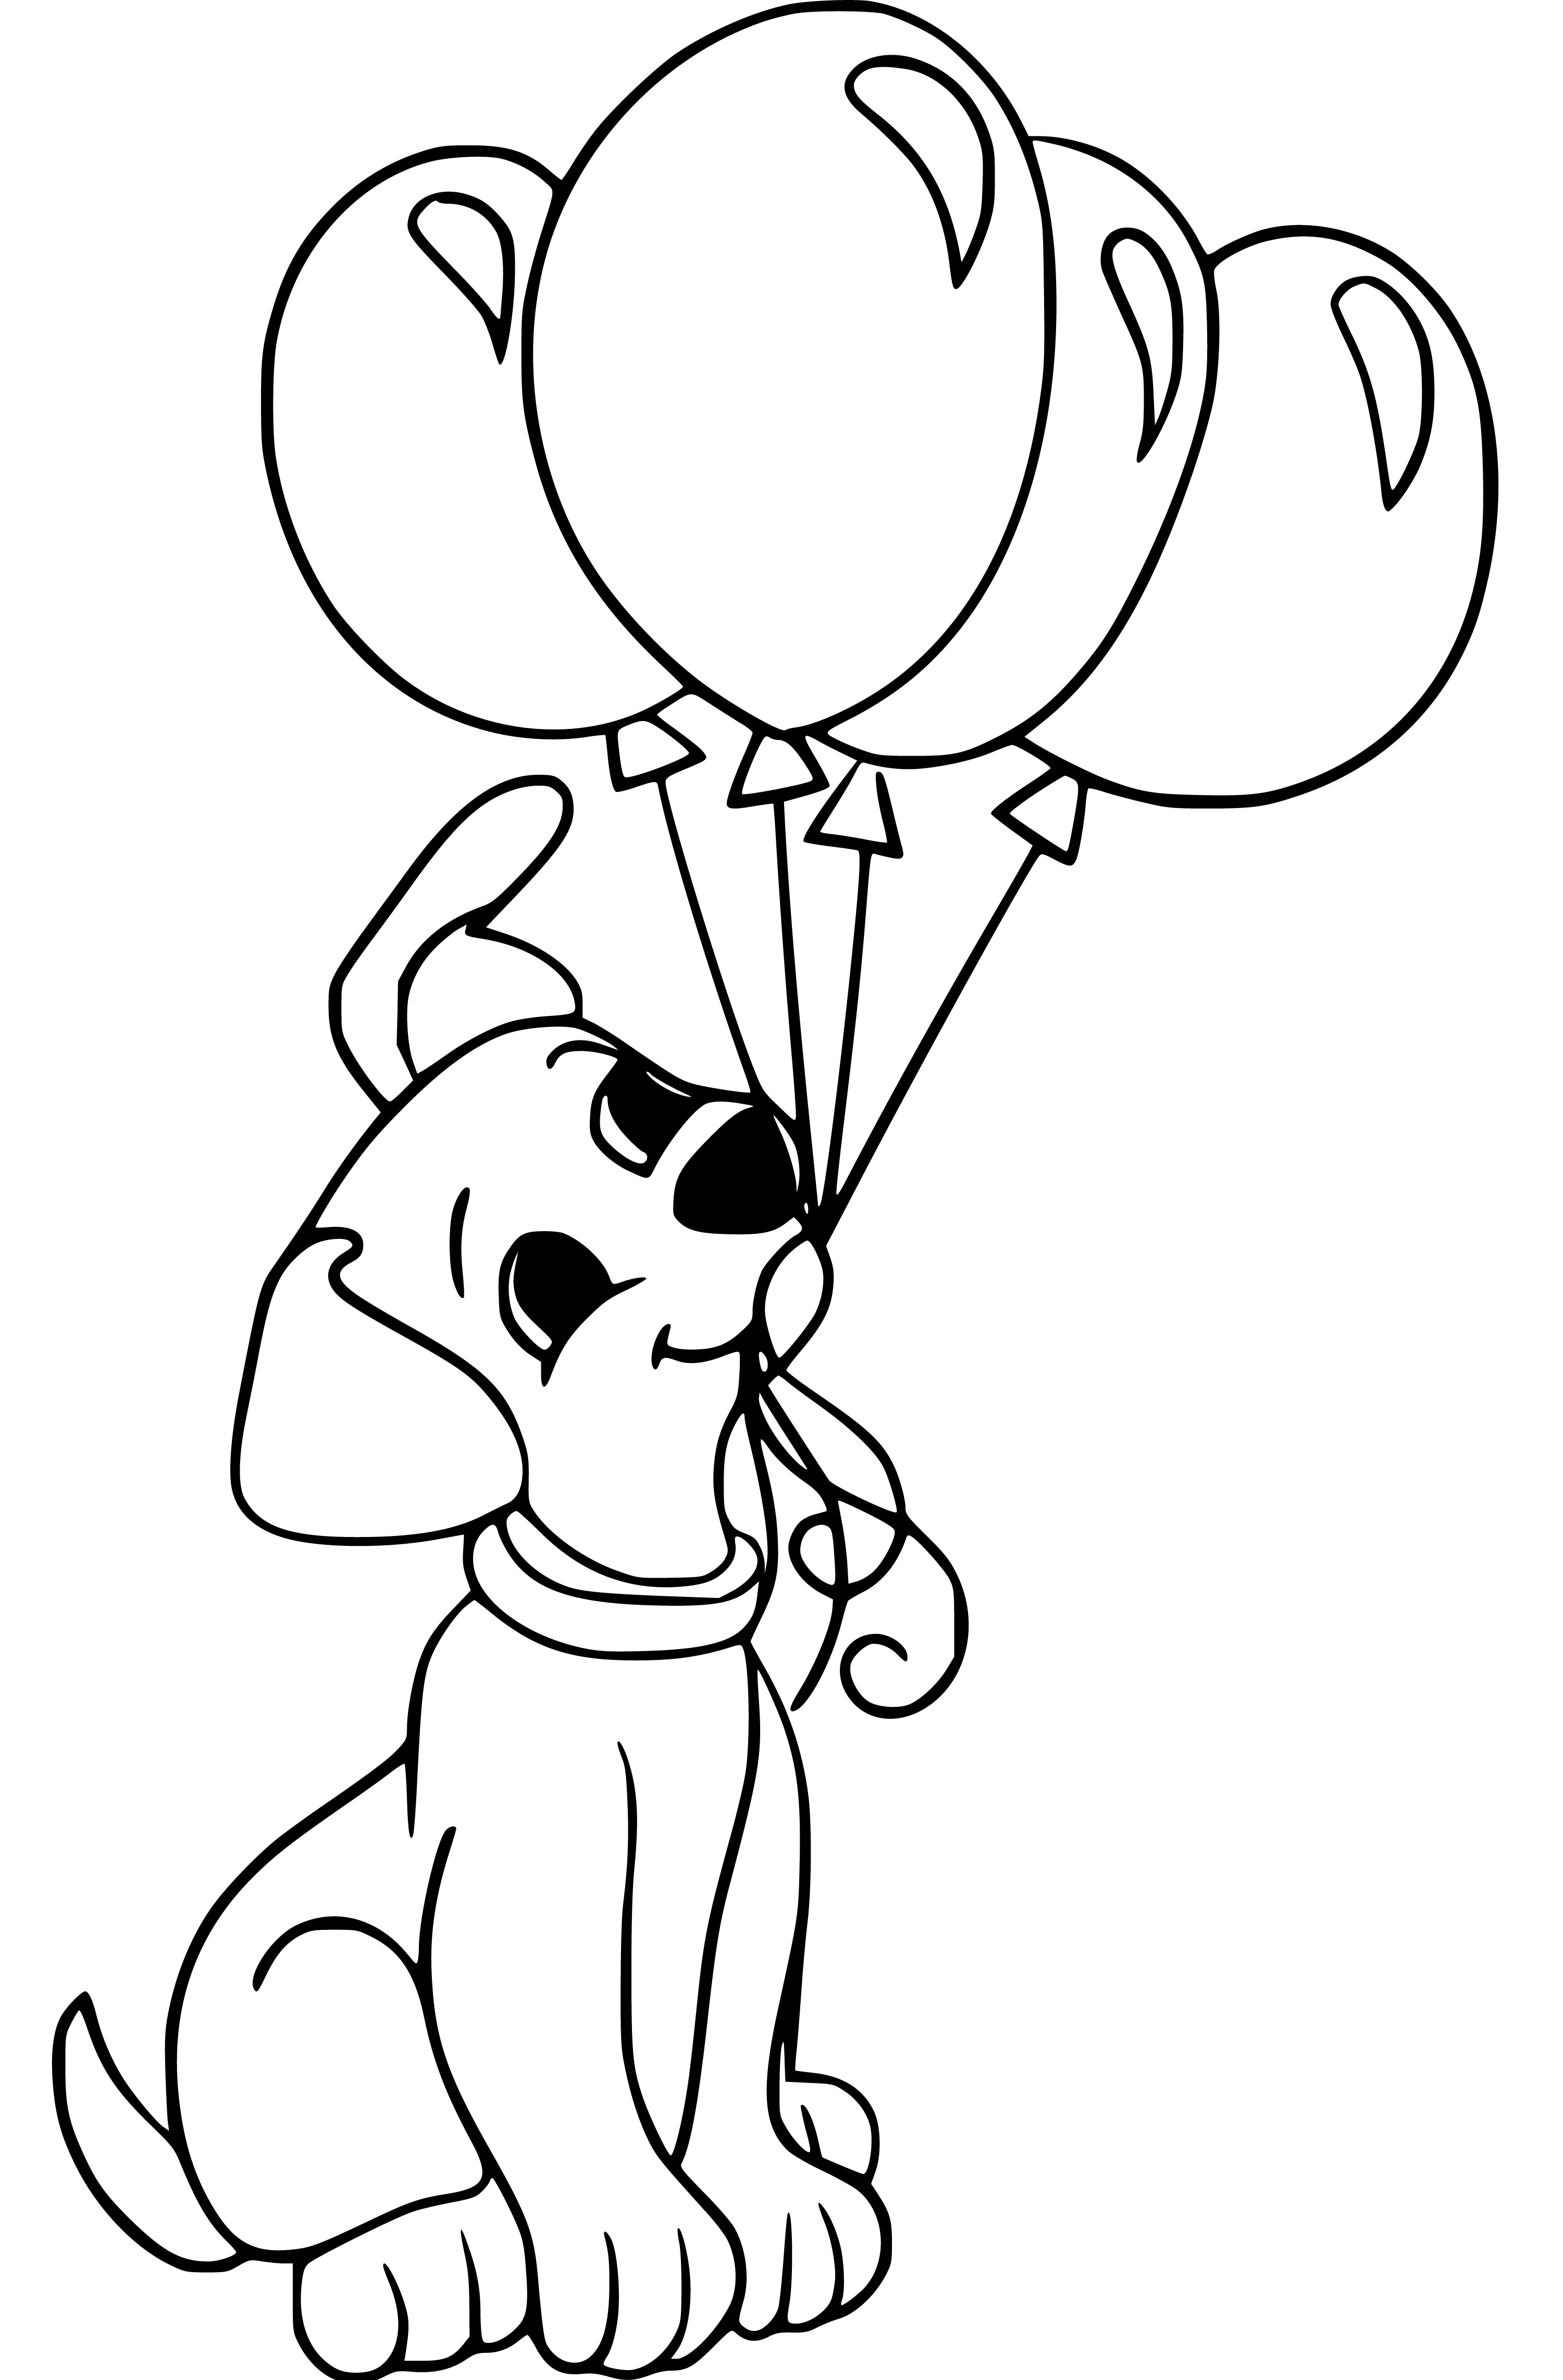 Puppy holding baloons Coloring Page for Children - SheetalColor.com